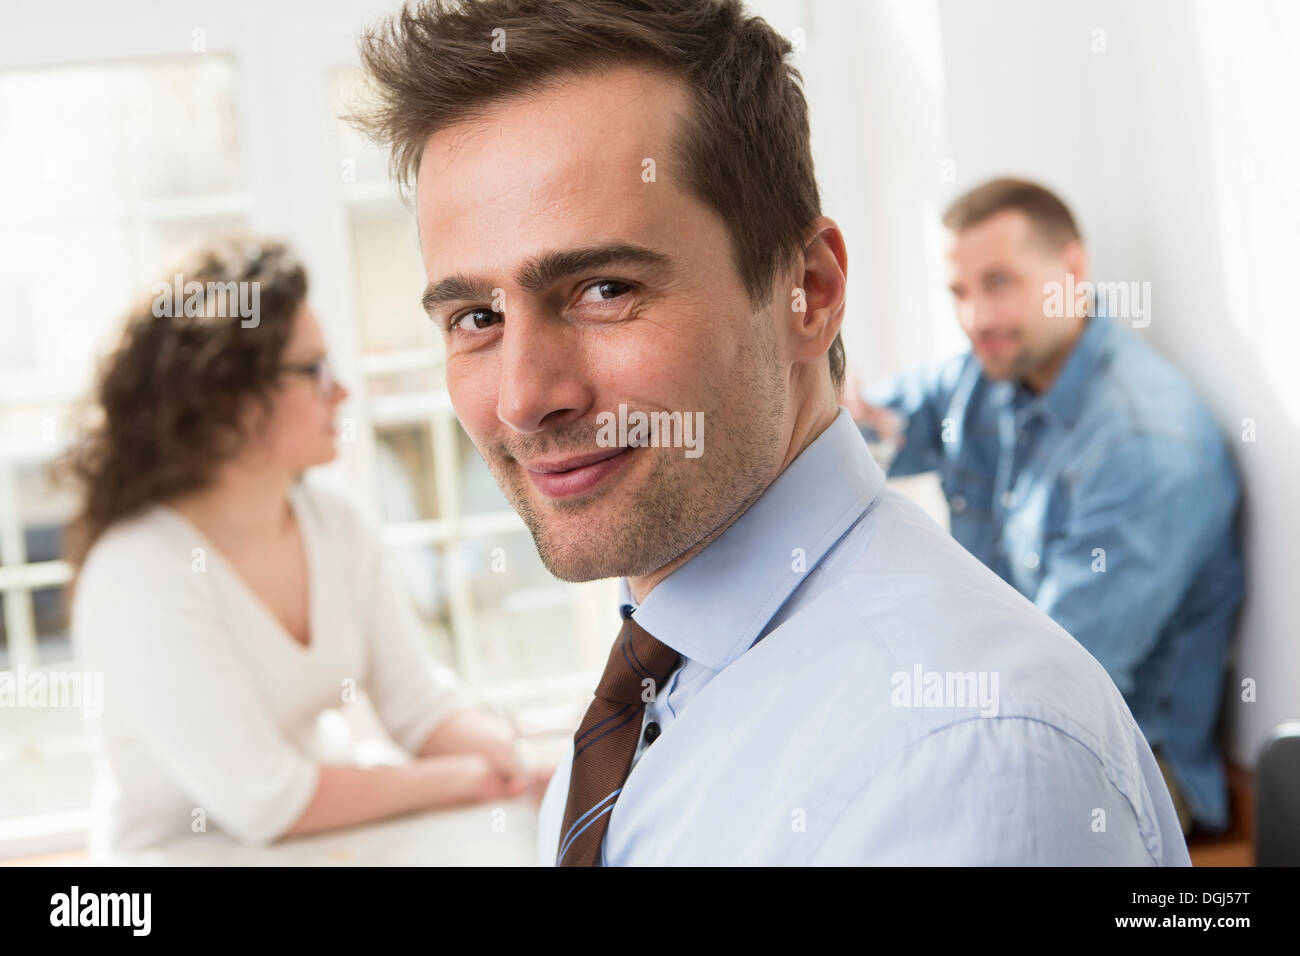 Mature man smiling at camera, mid adults in background Stock Photo